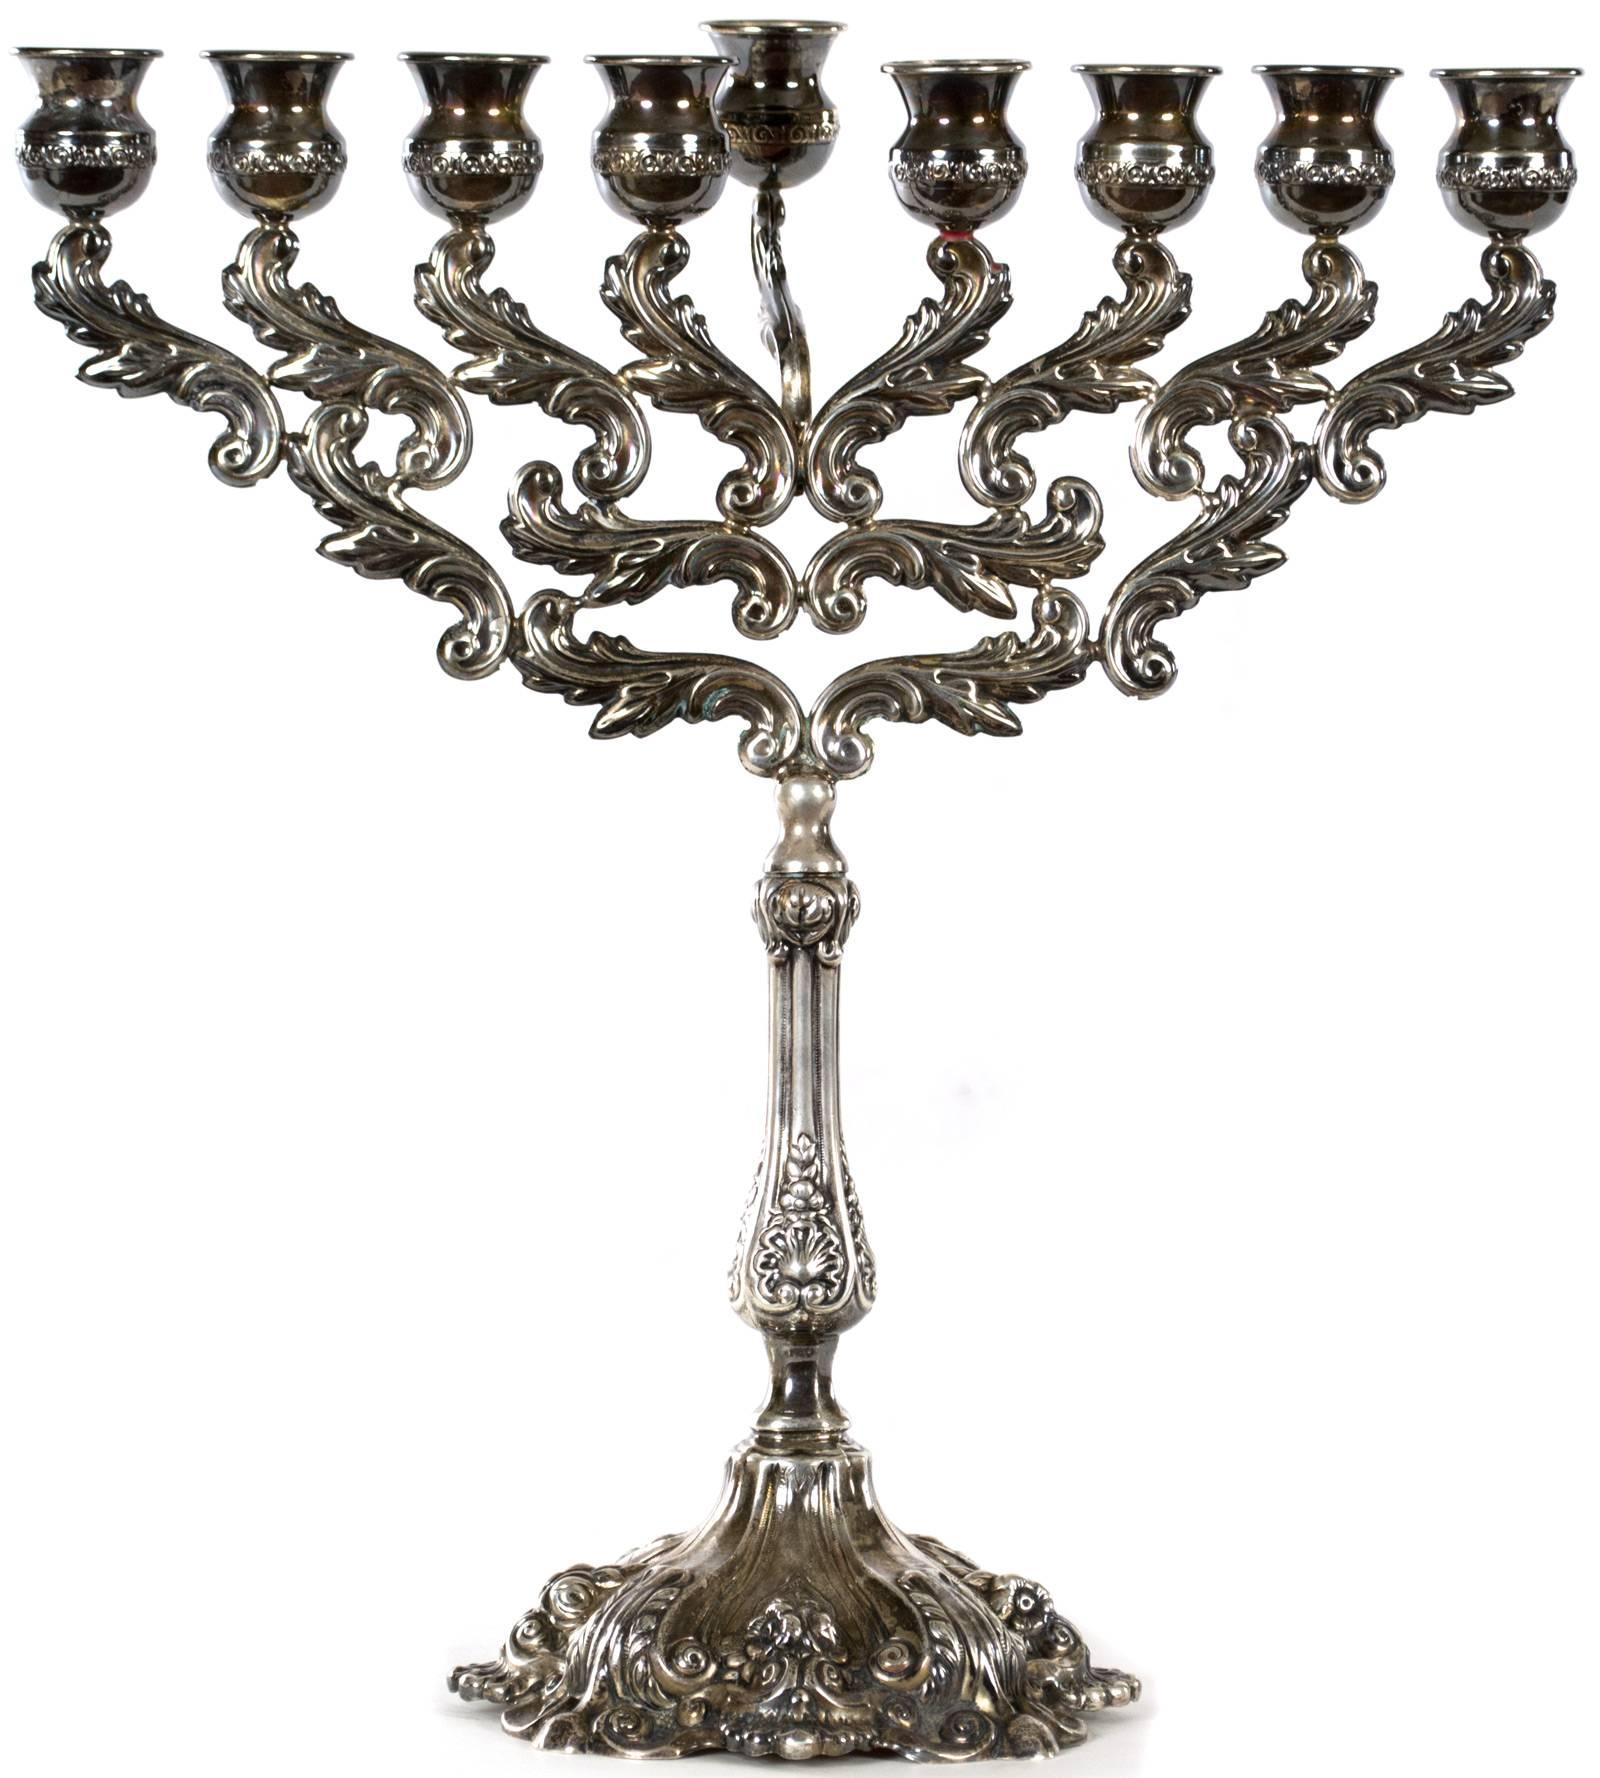 A beautifully cast and hand-chased menorah, decorated with acanthus leaves, shells, and s-scrolls made during the third quarter of the nineteenth century.